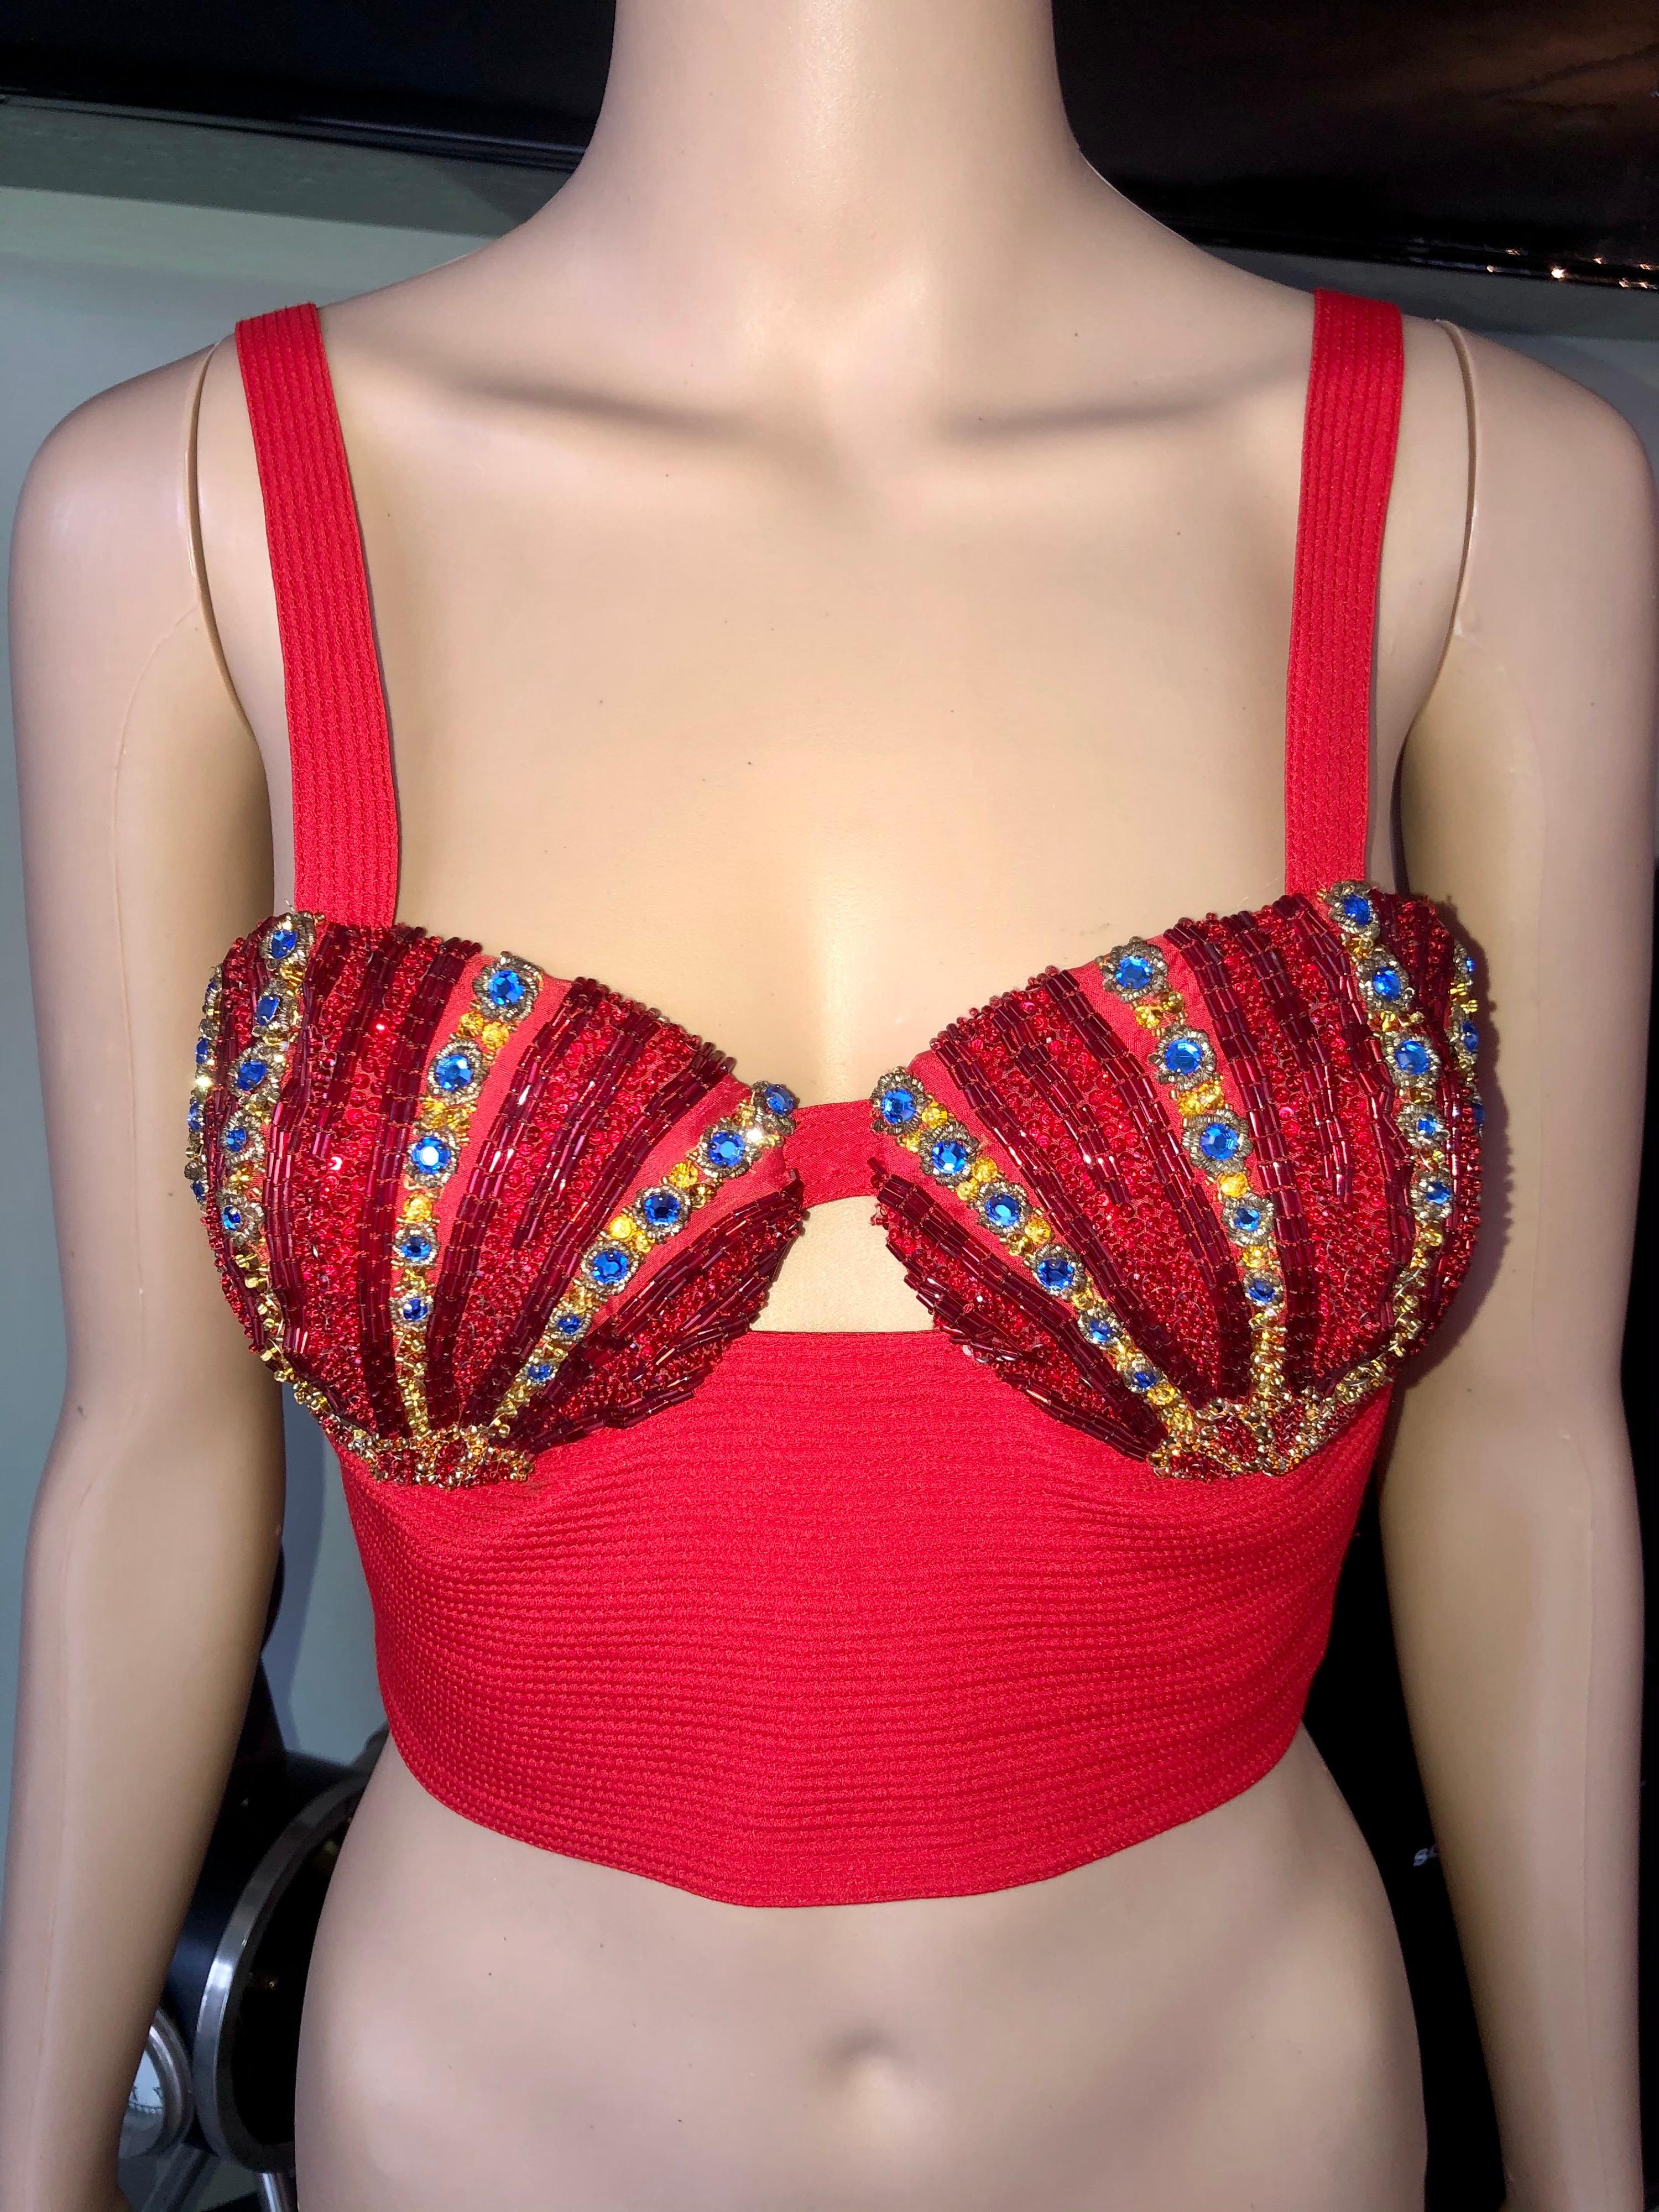 Red Gianni Versace S/S 1992 Couture Vintage Embellished Bustier Bra Crop Top 